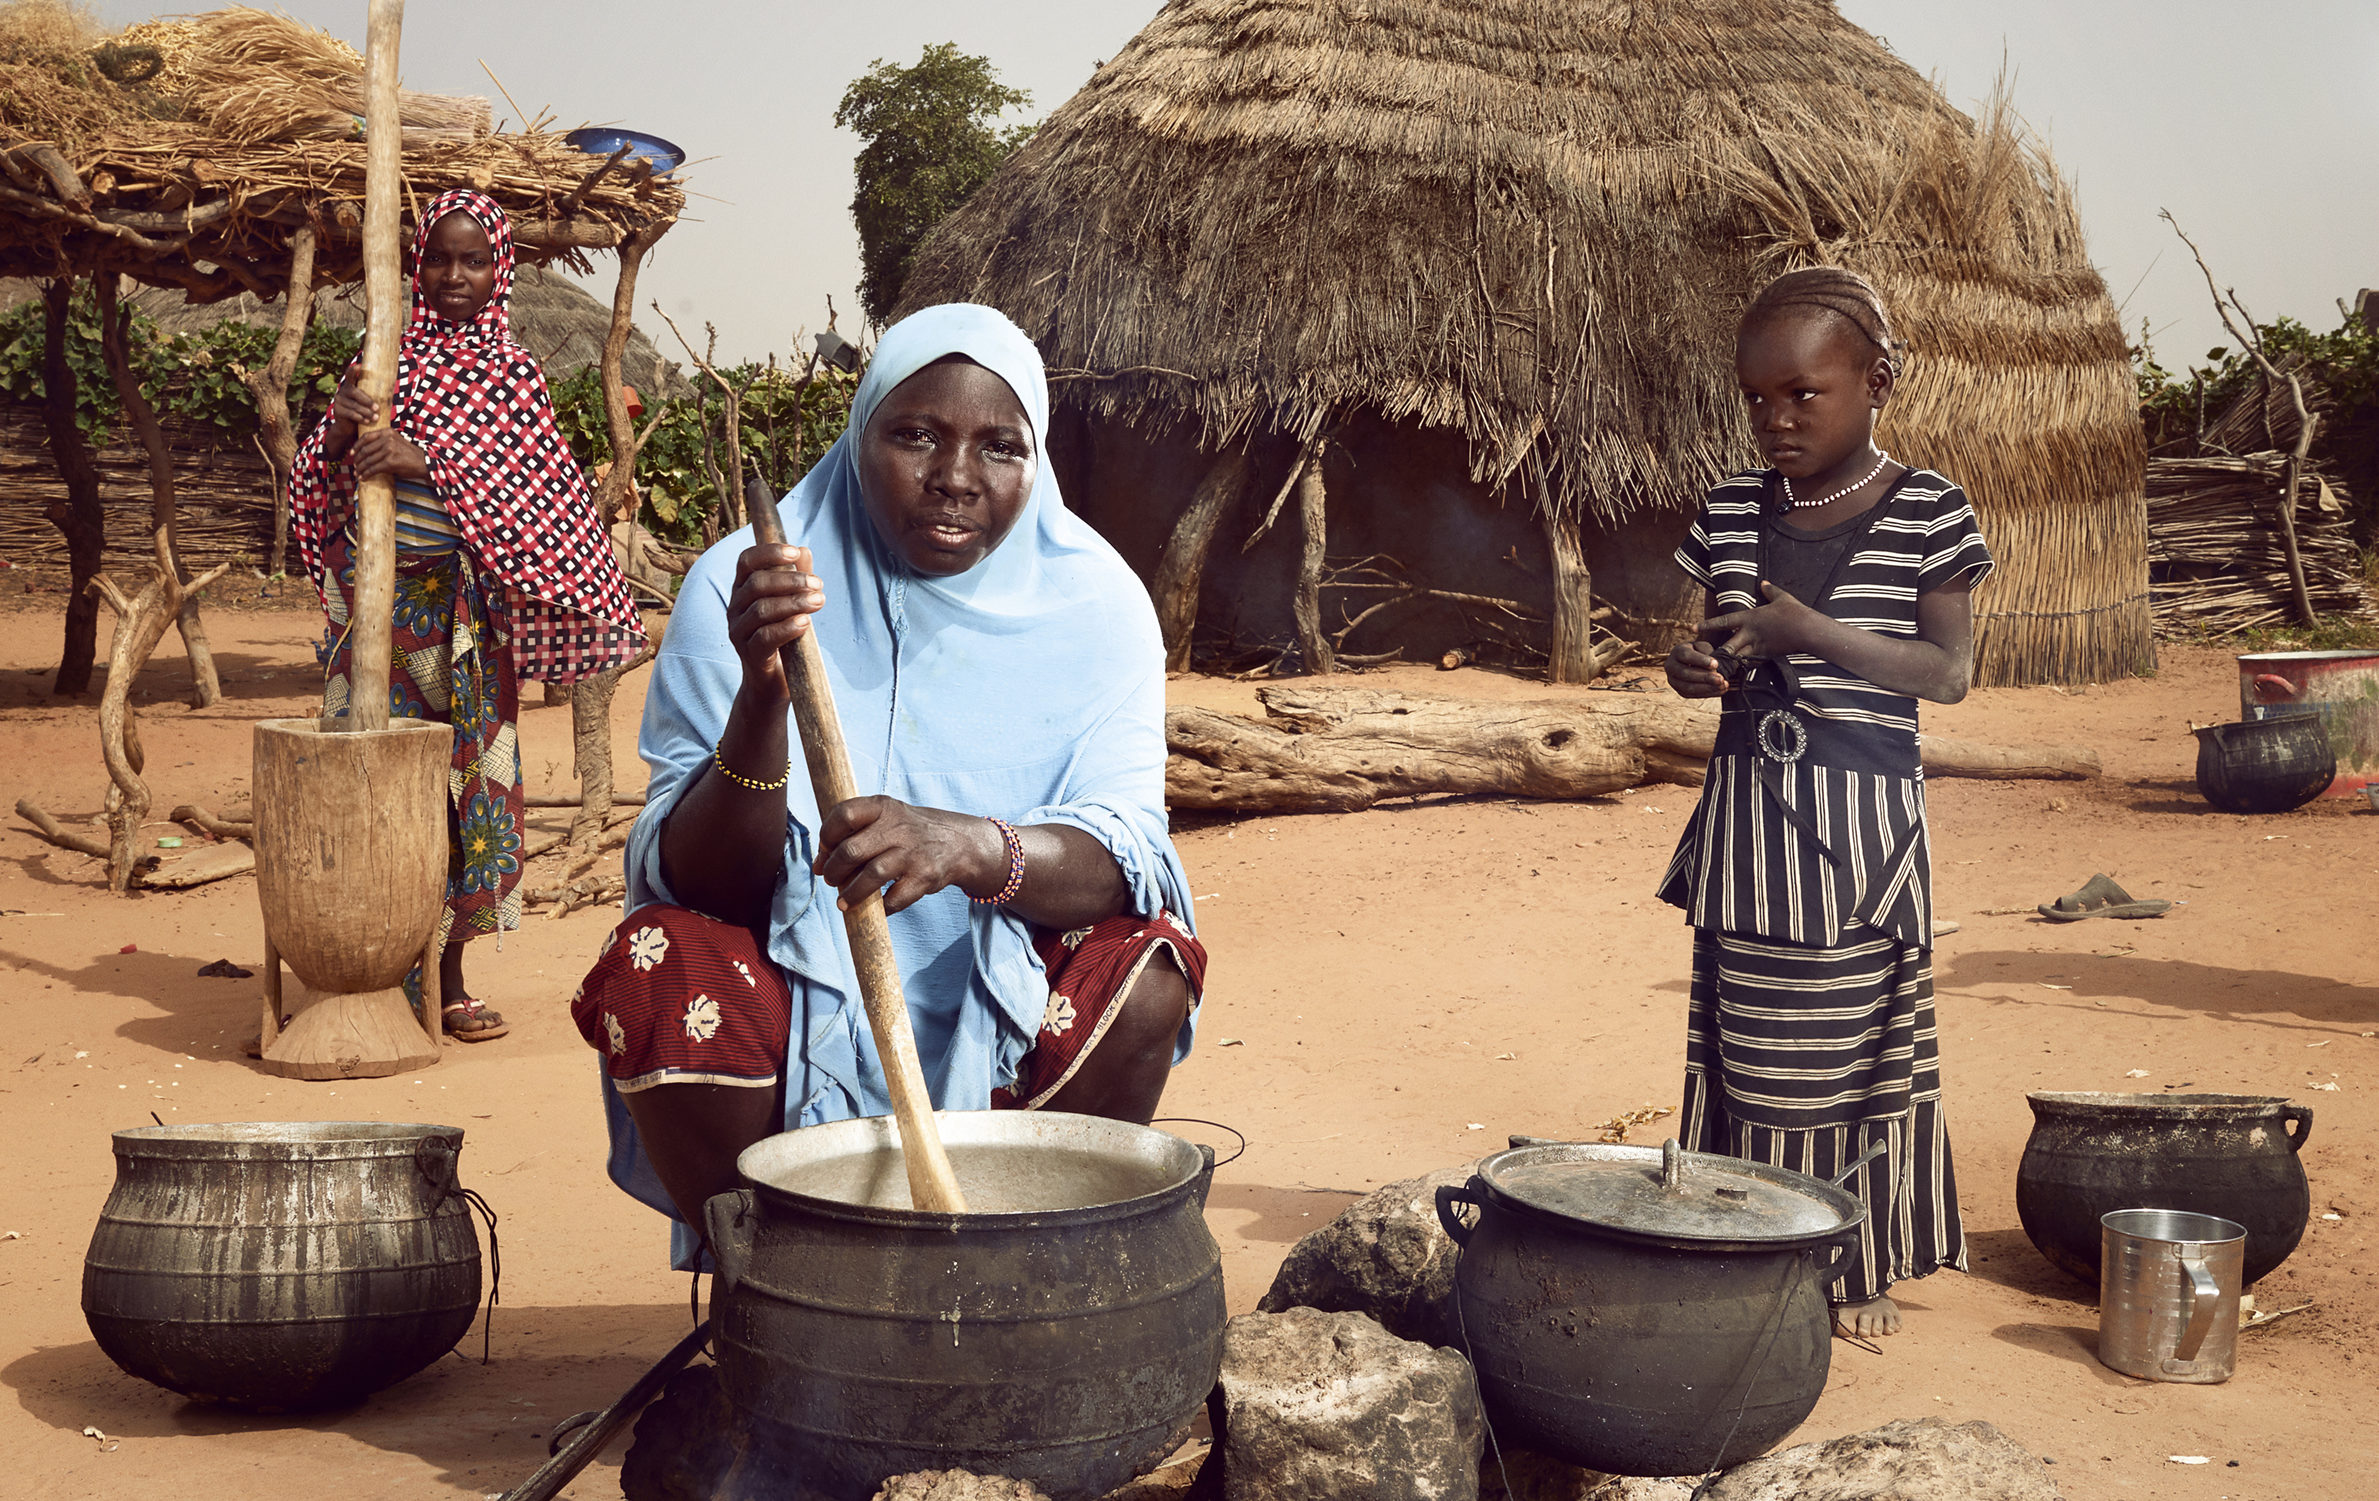 Hadiza (center) prepares a family meal, aided by her daughters Nadia, 4, and Layhanatou, 10, who grind millet in a wooden mortar. At age 32, Hadiza has six children, four sons and two daughters. She lives in Rabé chantier, a village 25 kilometers east of Dosso comprised of circular huts made of mud brick covered with straw, and granaries topped with straw hats. The little girls help their mother with chores while the men work in the fields. The village marabout sees to the children’s education. The most widely grown grain in Niger, it is the country’s dietary mainstay. Threshing, hulling and grinding millet by hand makes for a long, exhausting workday. The Ministry of Population, Advancement of Women and Protection of Children has made it a priority to lighten women’s workloads by providing them access to mills, hullers and water sources. In the countryside, however, many Niger women have no choice but to use the traditional methods. The agriculture sector in Niger is characterized by very low levels of farm input use and low productivity. Women account for approximately 24% of Niger’s agricultural farm labour, but have sole ownership of only 9% of the total land area controlled by Niger’s households. Increasing women’s contributions to Niger’s agricultural sector could help rural households lift themselves out of poverty. Photo: © Stephan Gladieu / World Bank